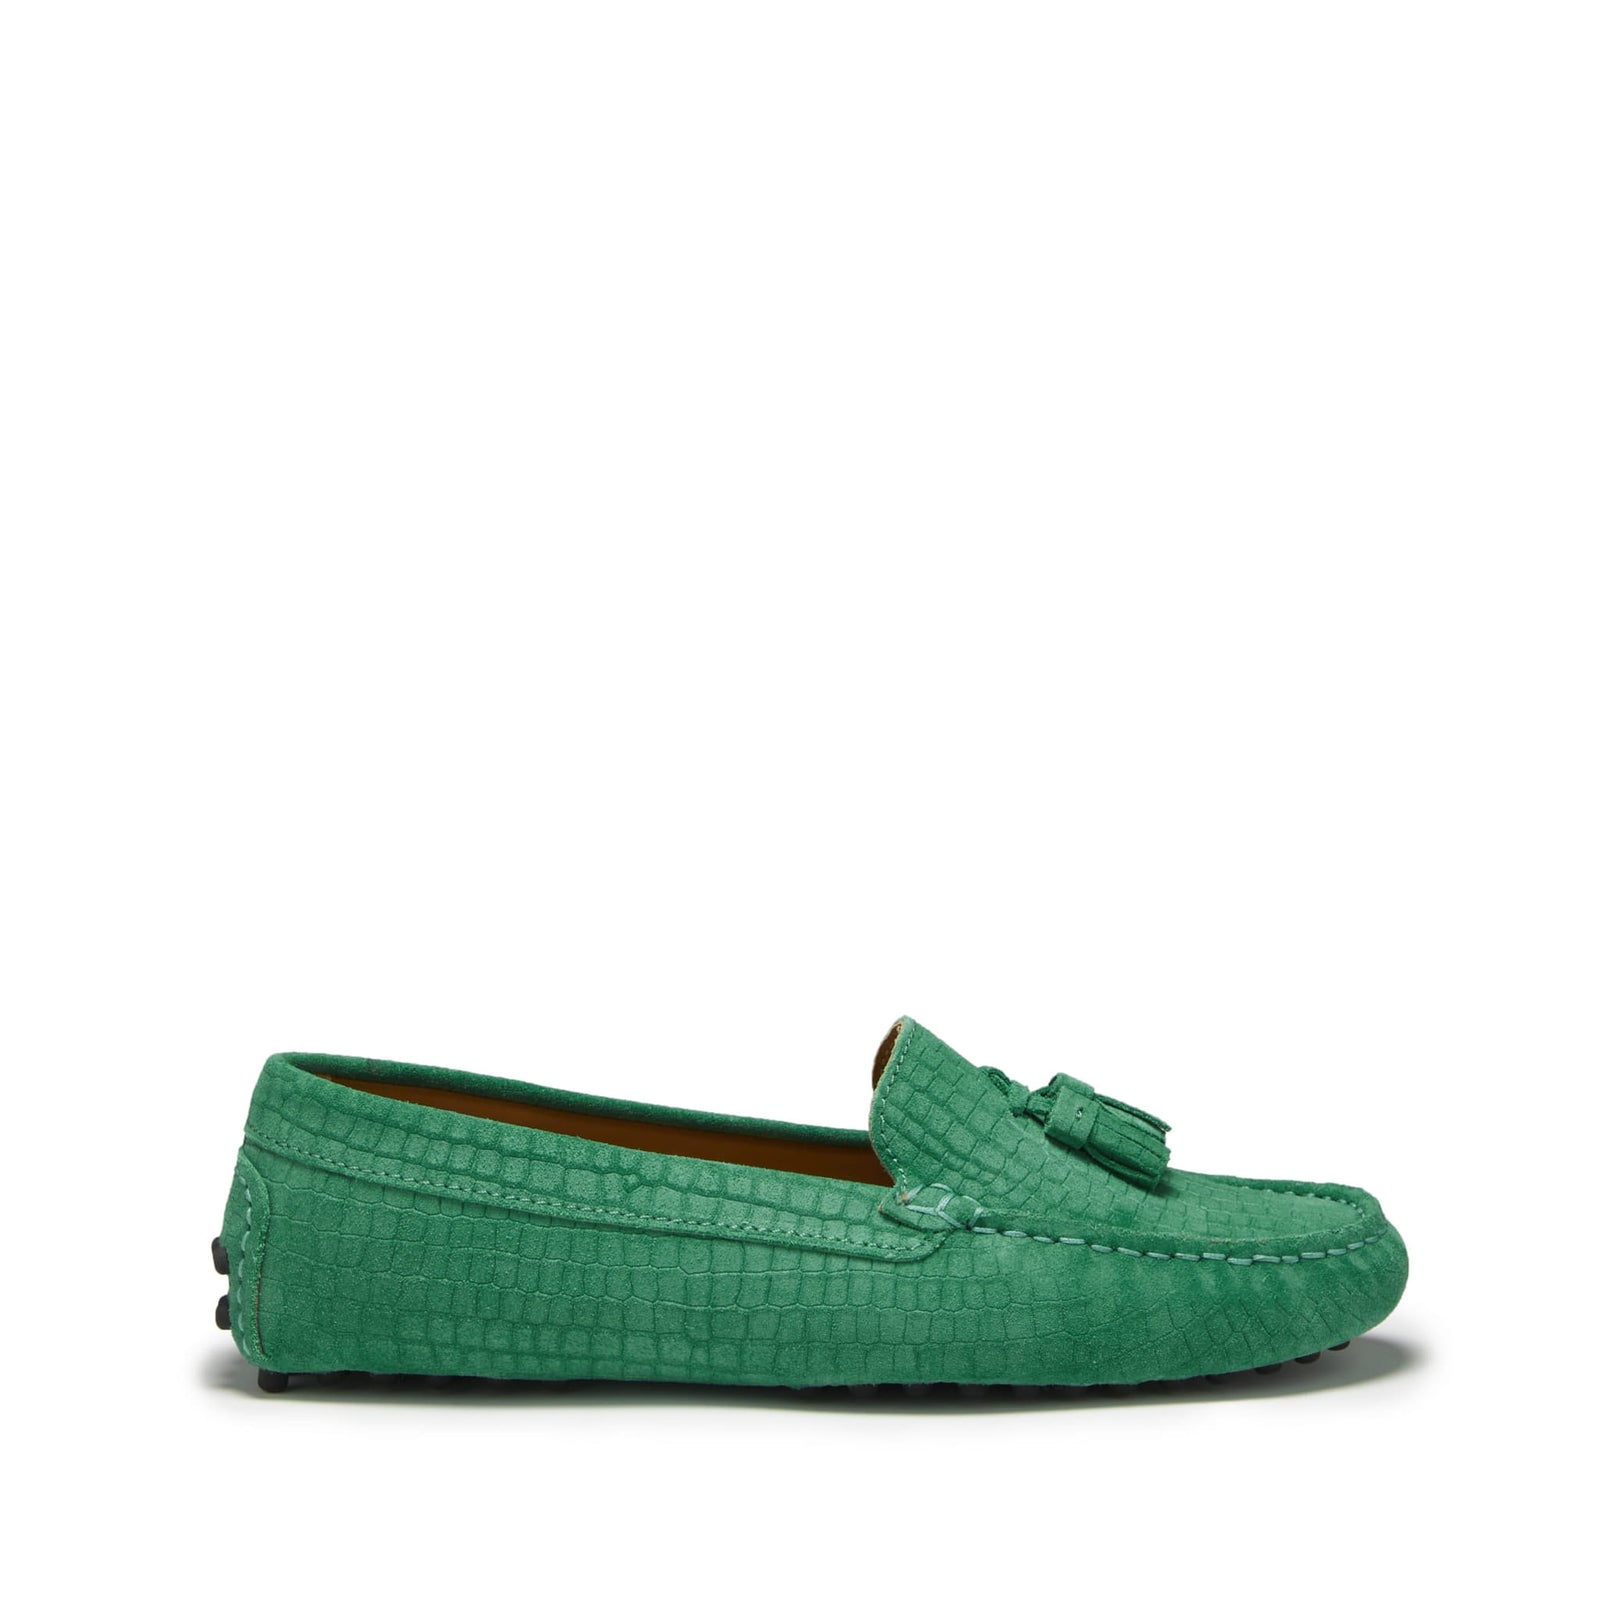 Women's Tasselled Driving Loafers, emerald embossed suede